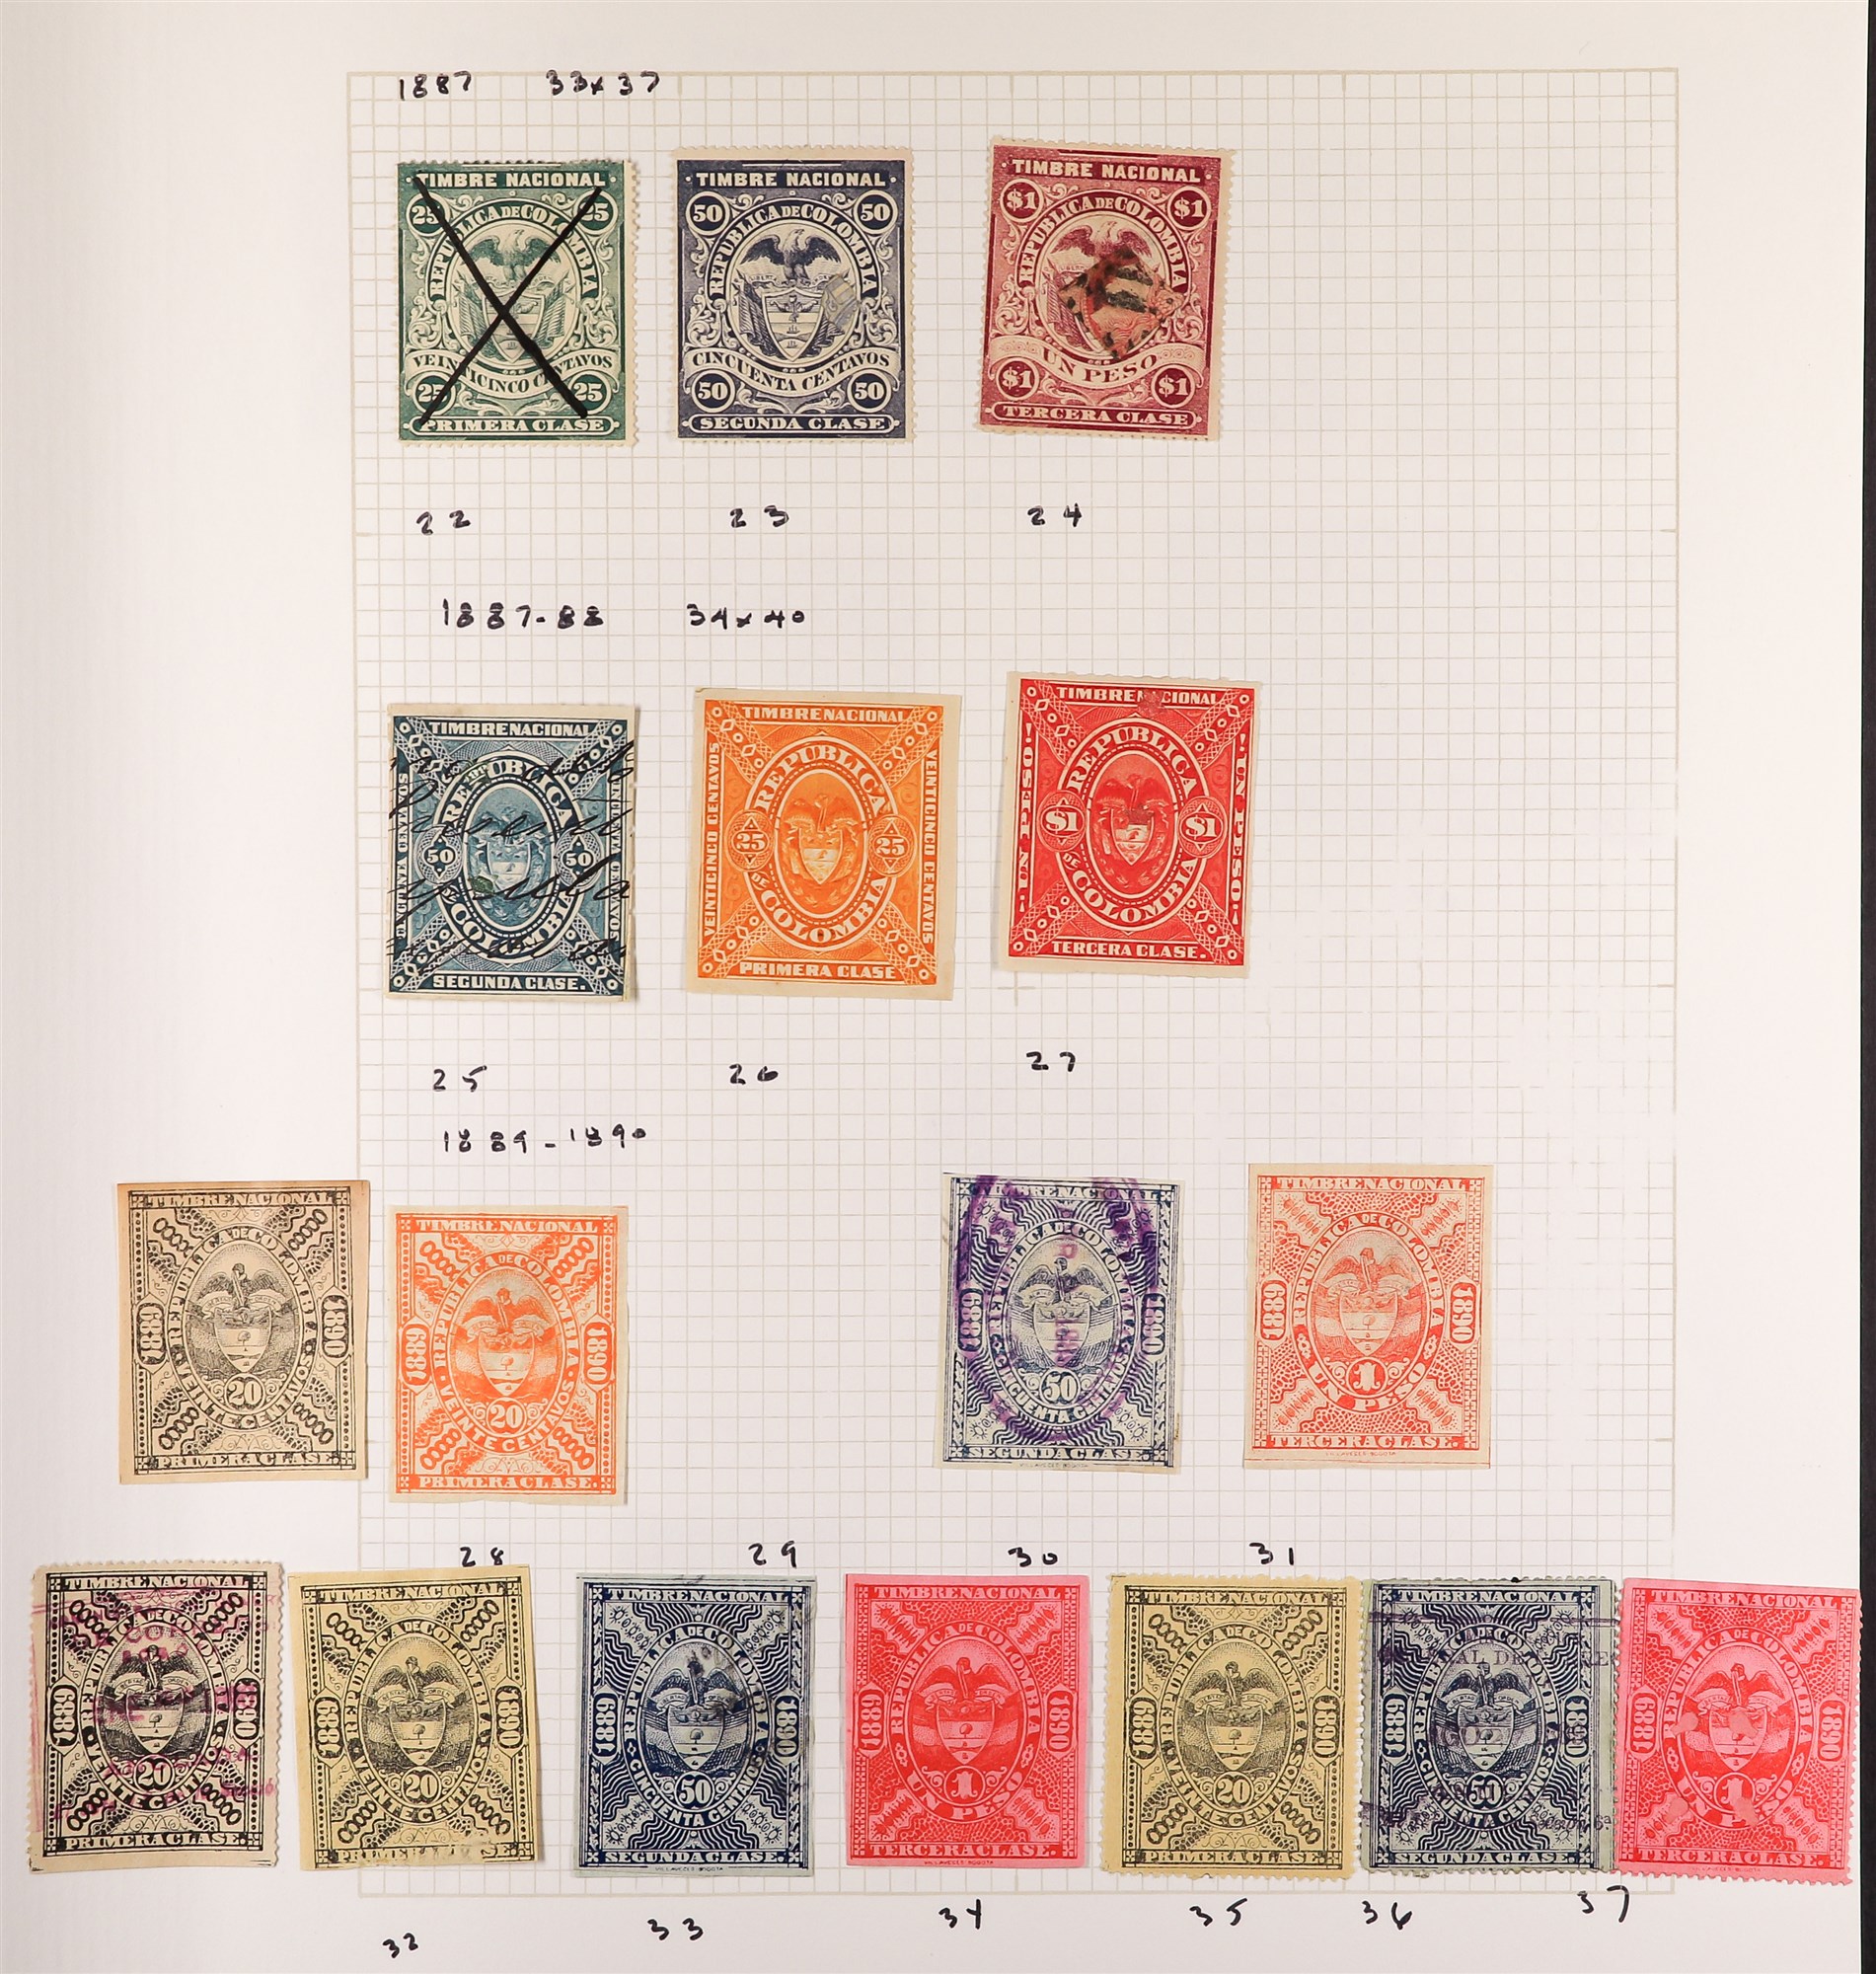 COLOMBIA REVENUE STAMPS COLLECTION largely 19th century issues on pages and in packets, incl. Timbre